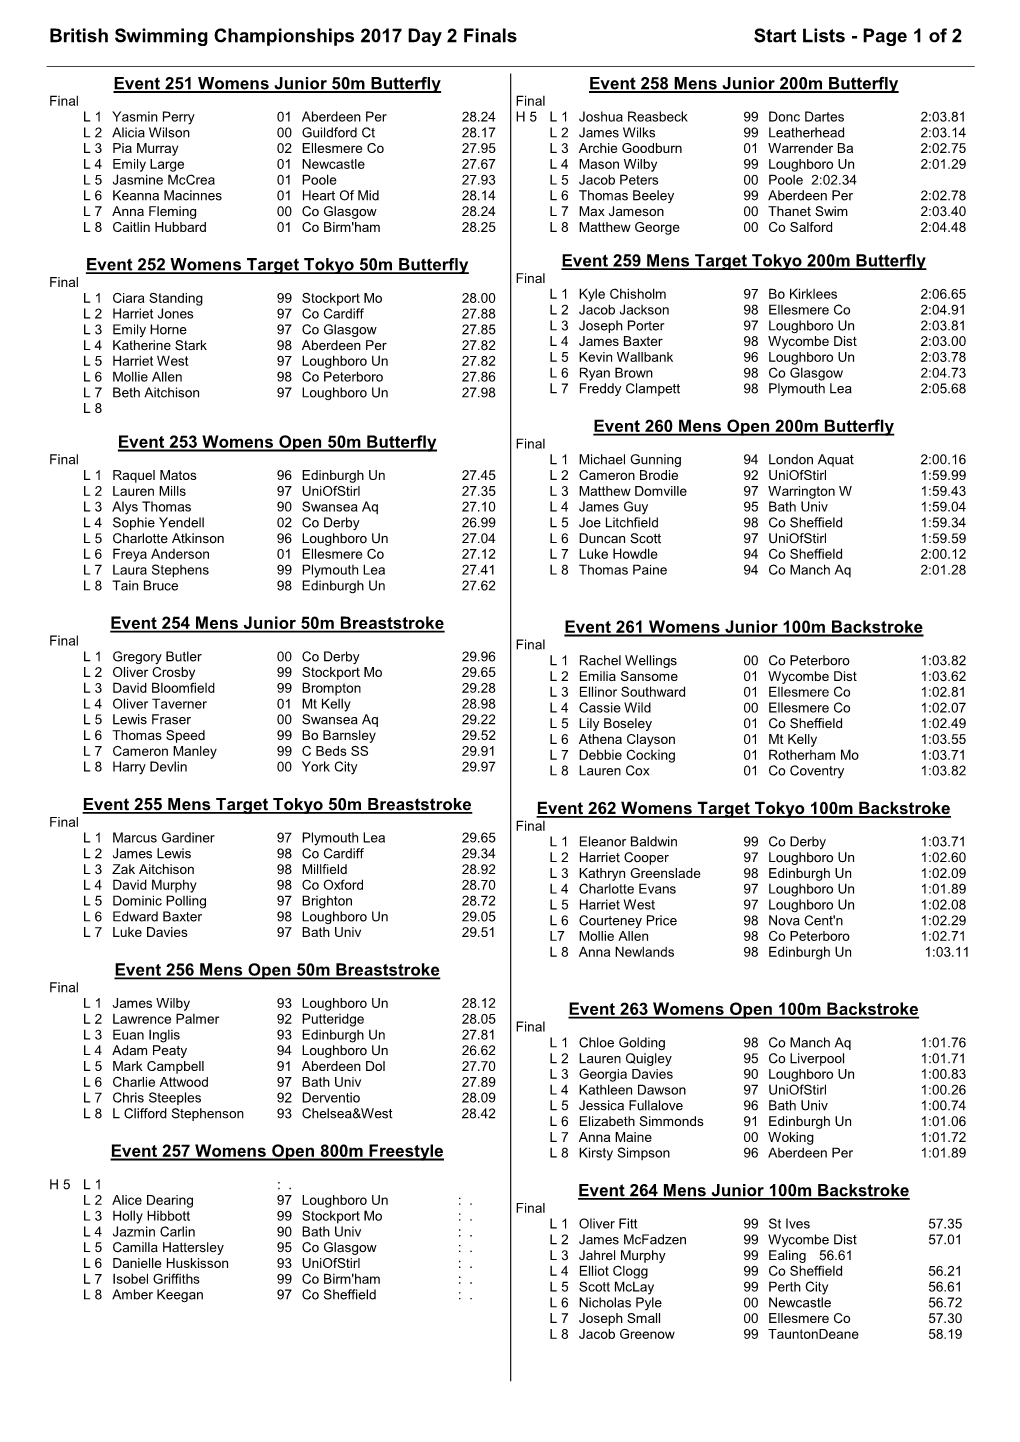 British Swimming Championships 2017 Day 2 Finals Start Lists - Page 1 of 2